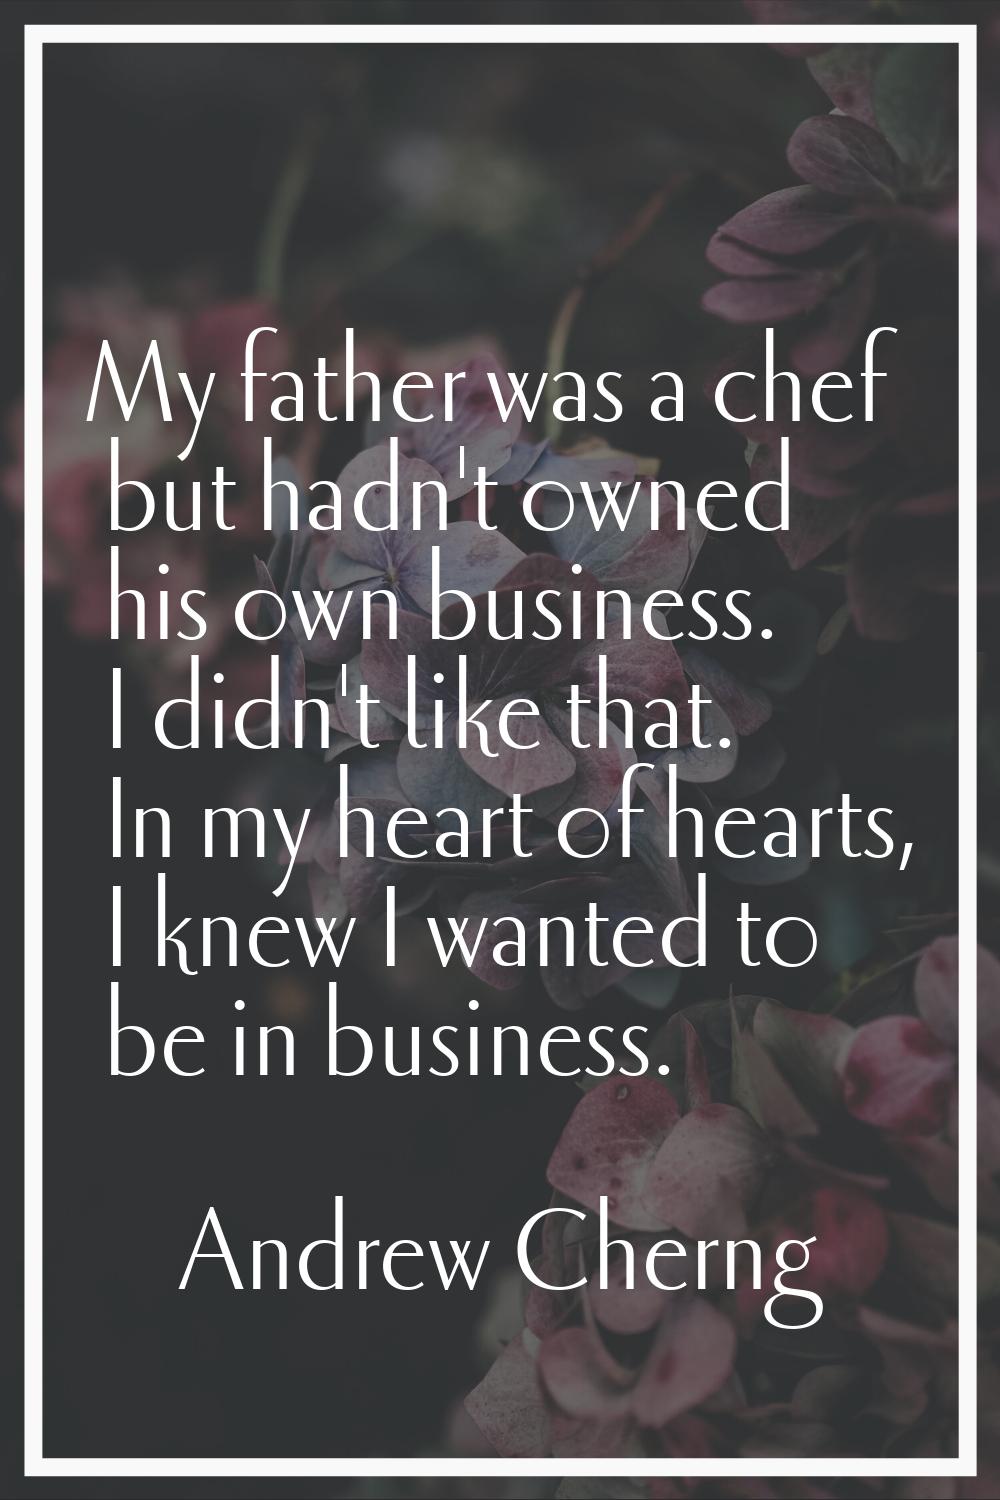 My father was a chef but hadn't owned his own business. I didn't like that. In my heart of hearts, 